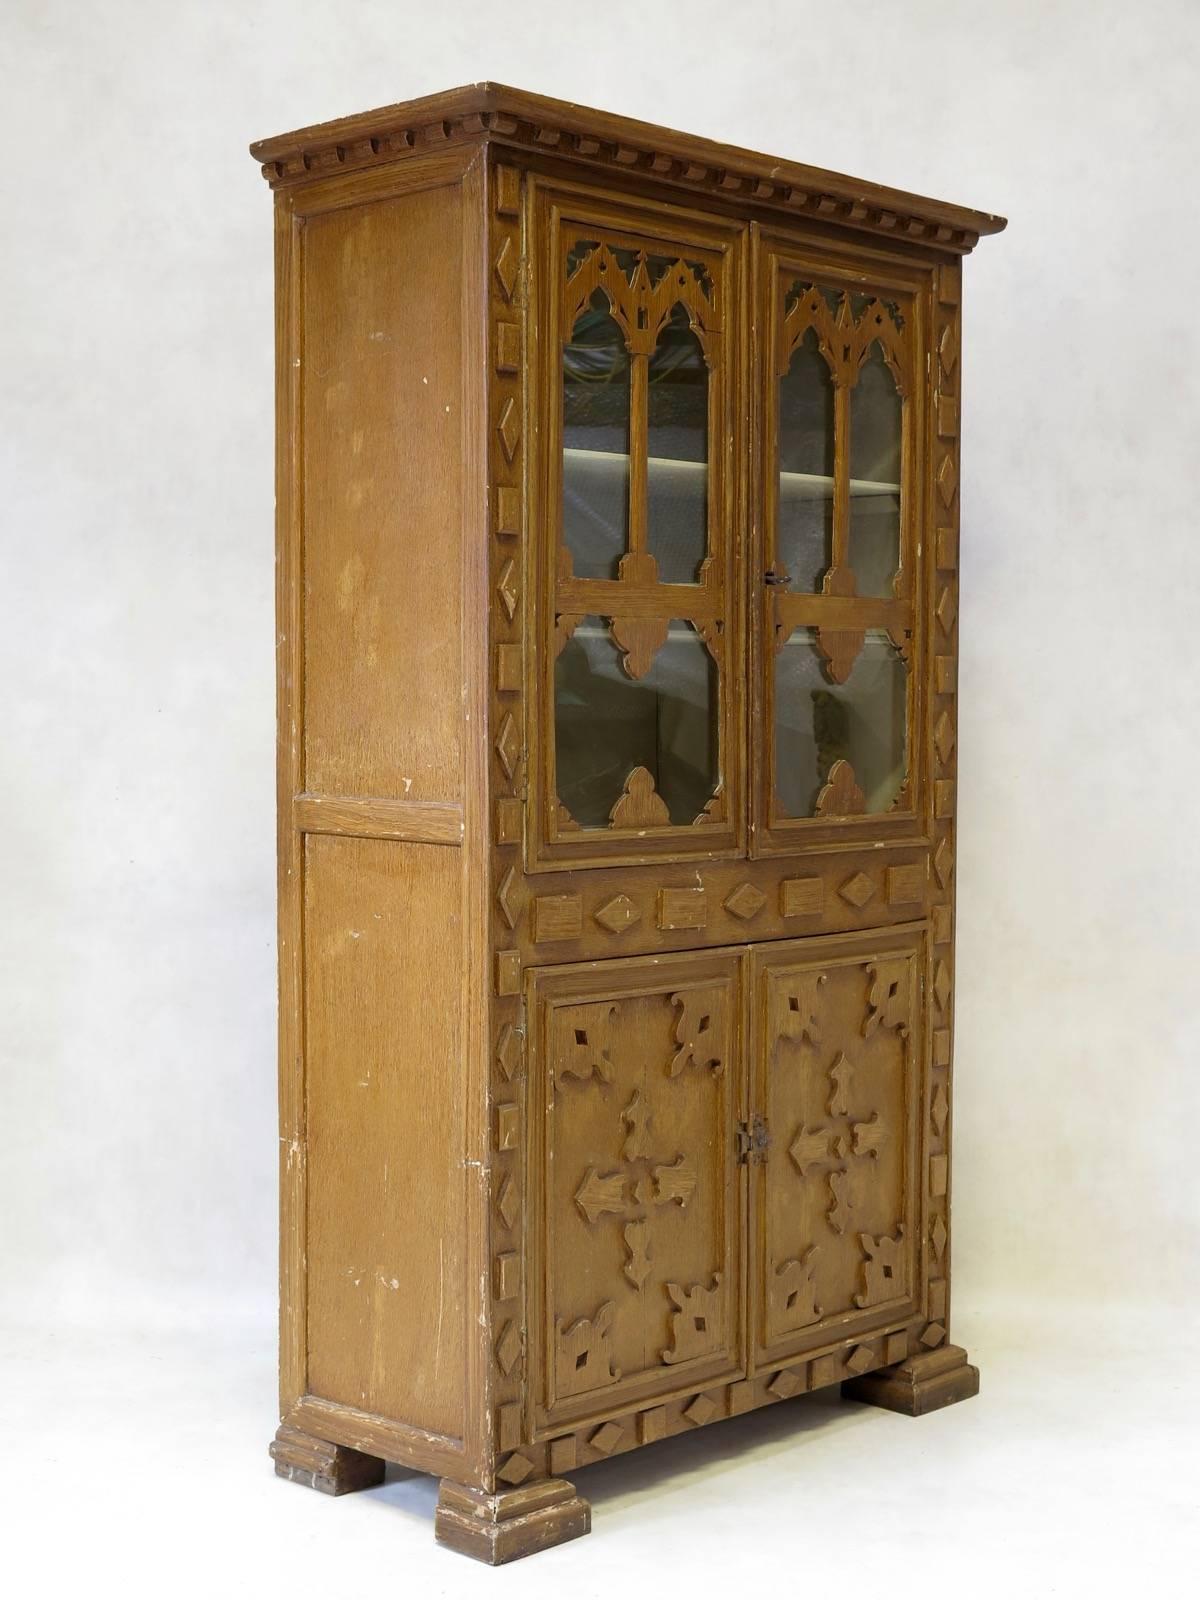 Delightful and unusual pinewood cabinet from the Jura region of France, painted with a faux-bois effect. The style has elements reminiscent of the Gothic aesthetic. The top section has glass panes, with a painted interior. The cornice is